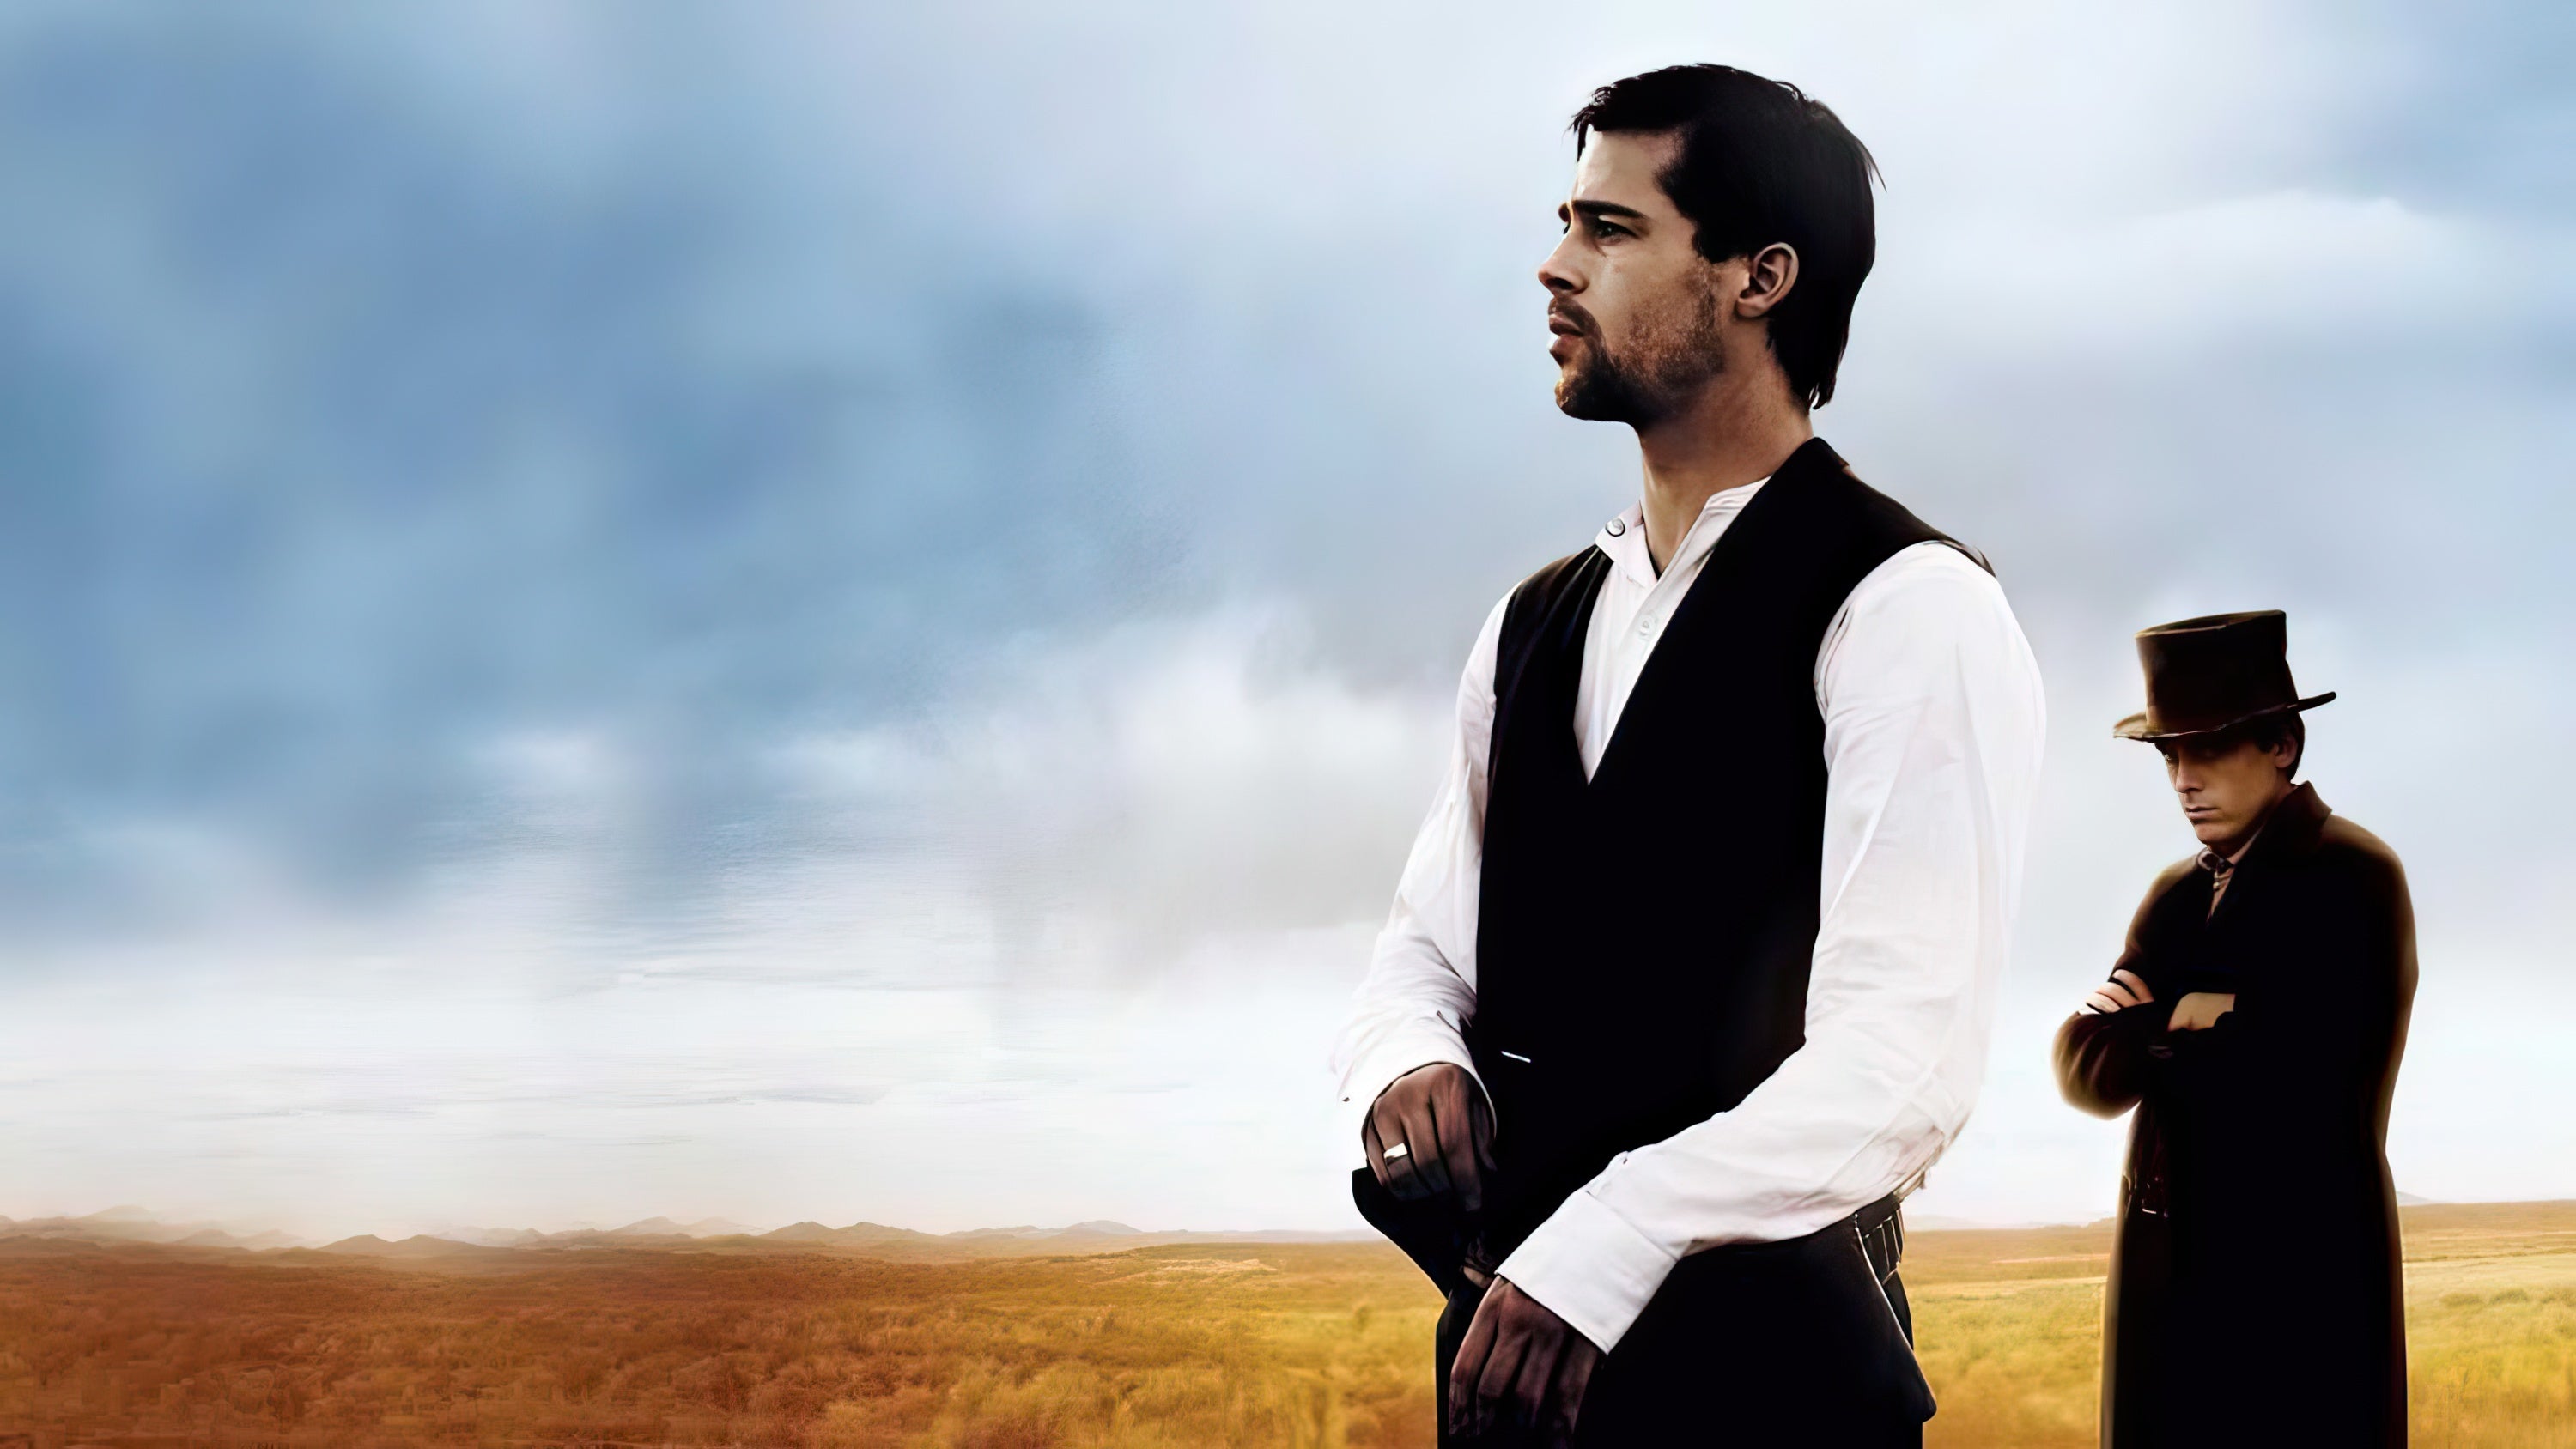 The Assassination of Jesse James by the Coward Robert Ford (Script)